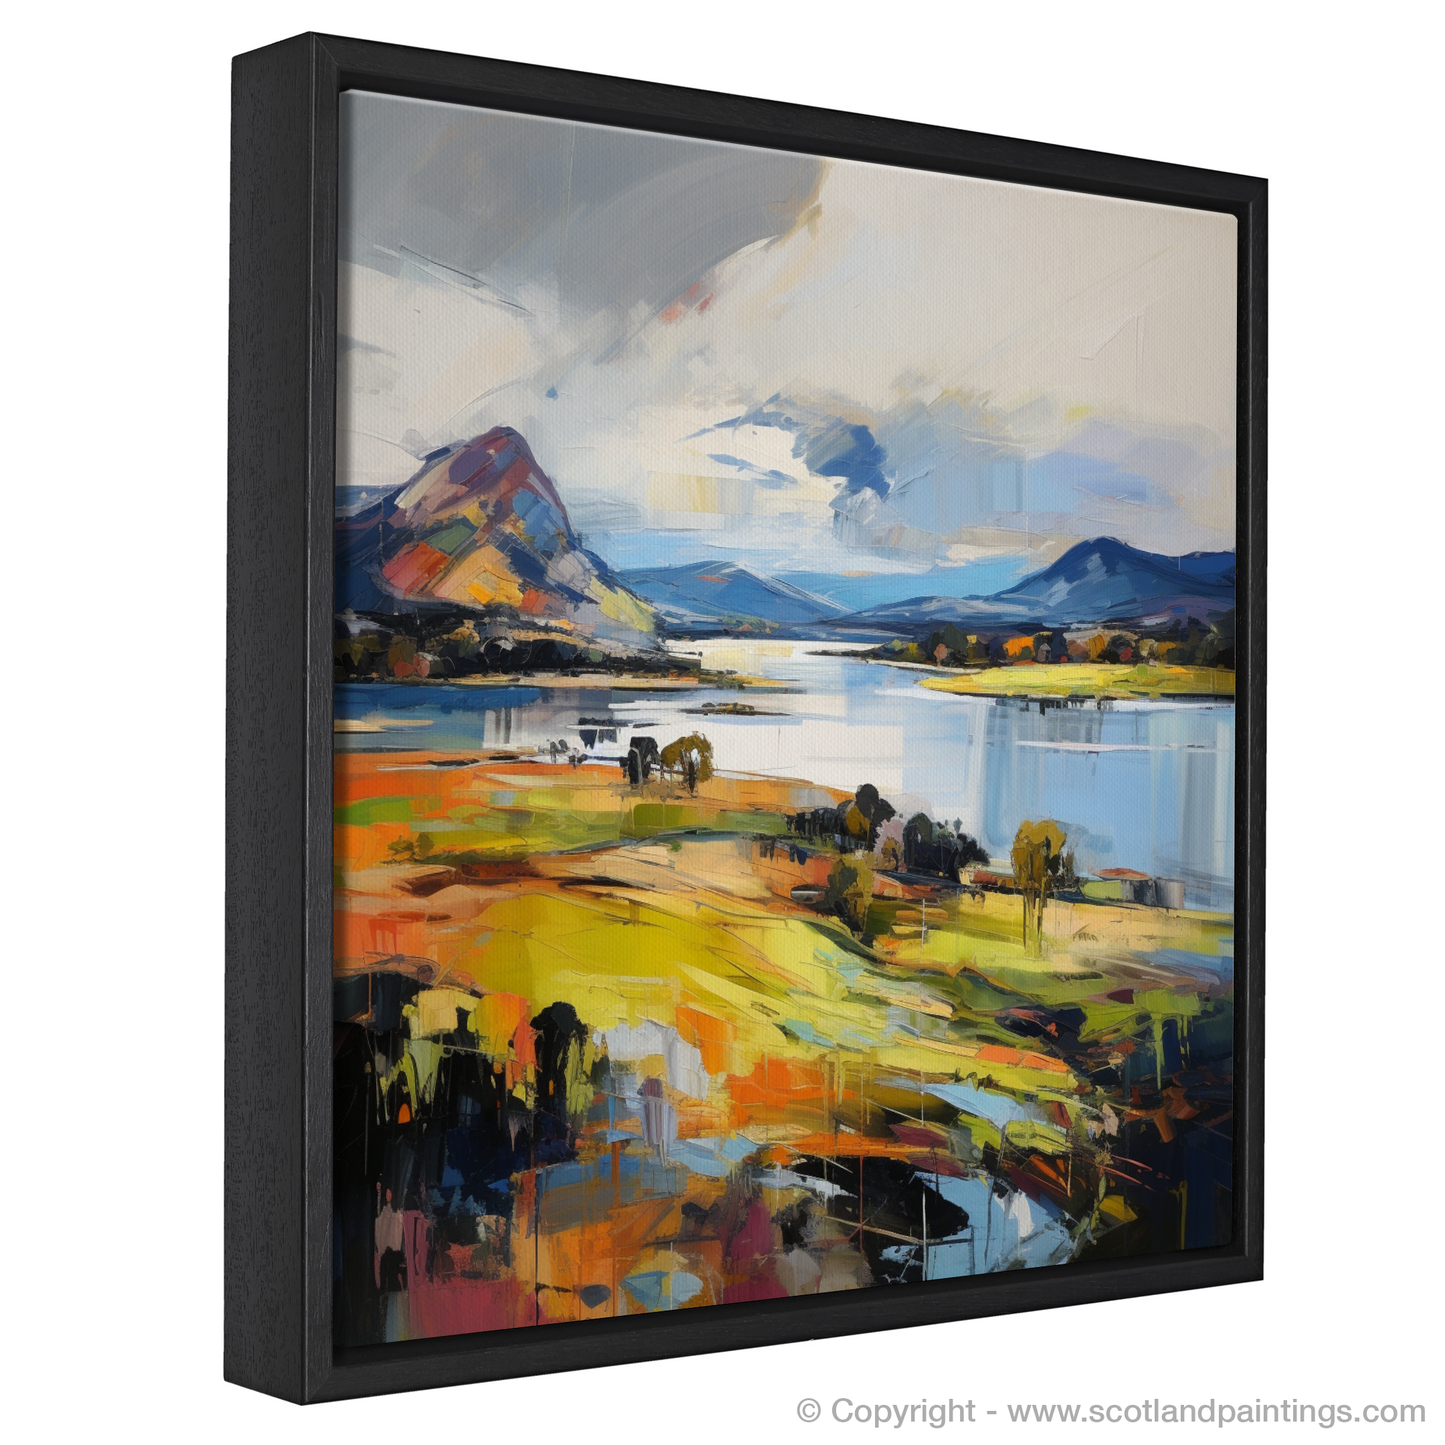 Painting and Art Print of Loch Leven, Perth and Kinross entitled "Loch Leven Unleashed: An Expressionist Ode to Scotland's Wild Beauty".